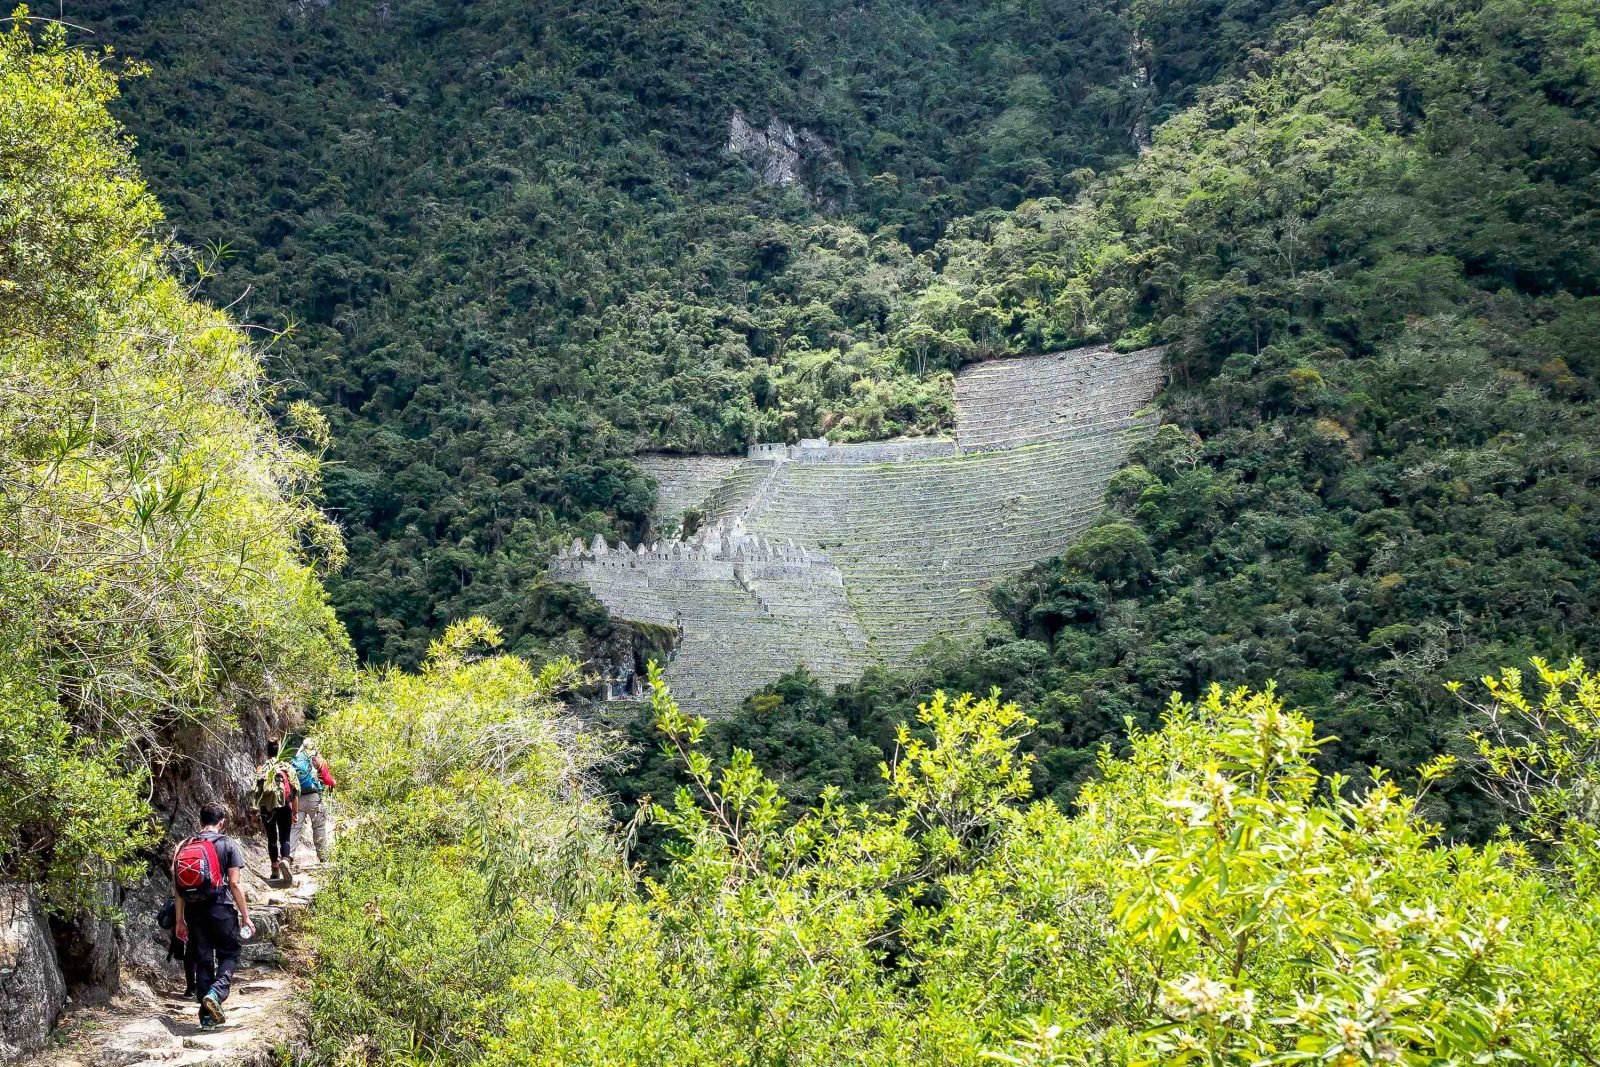 Hikers trek through the forest in Peru, towards the Winay Wayna ruins